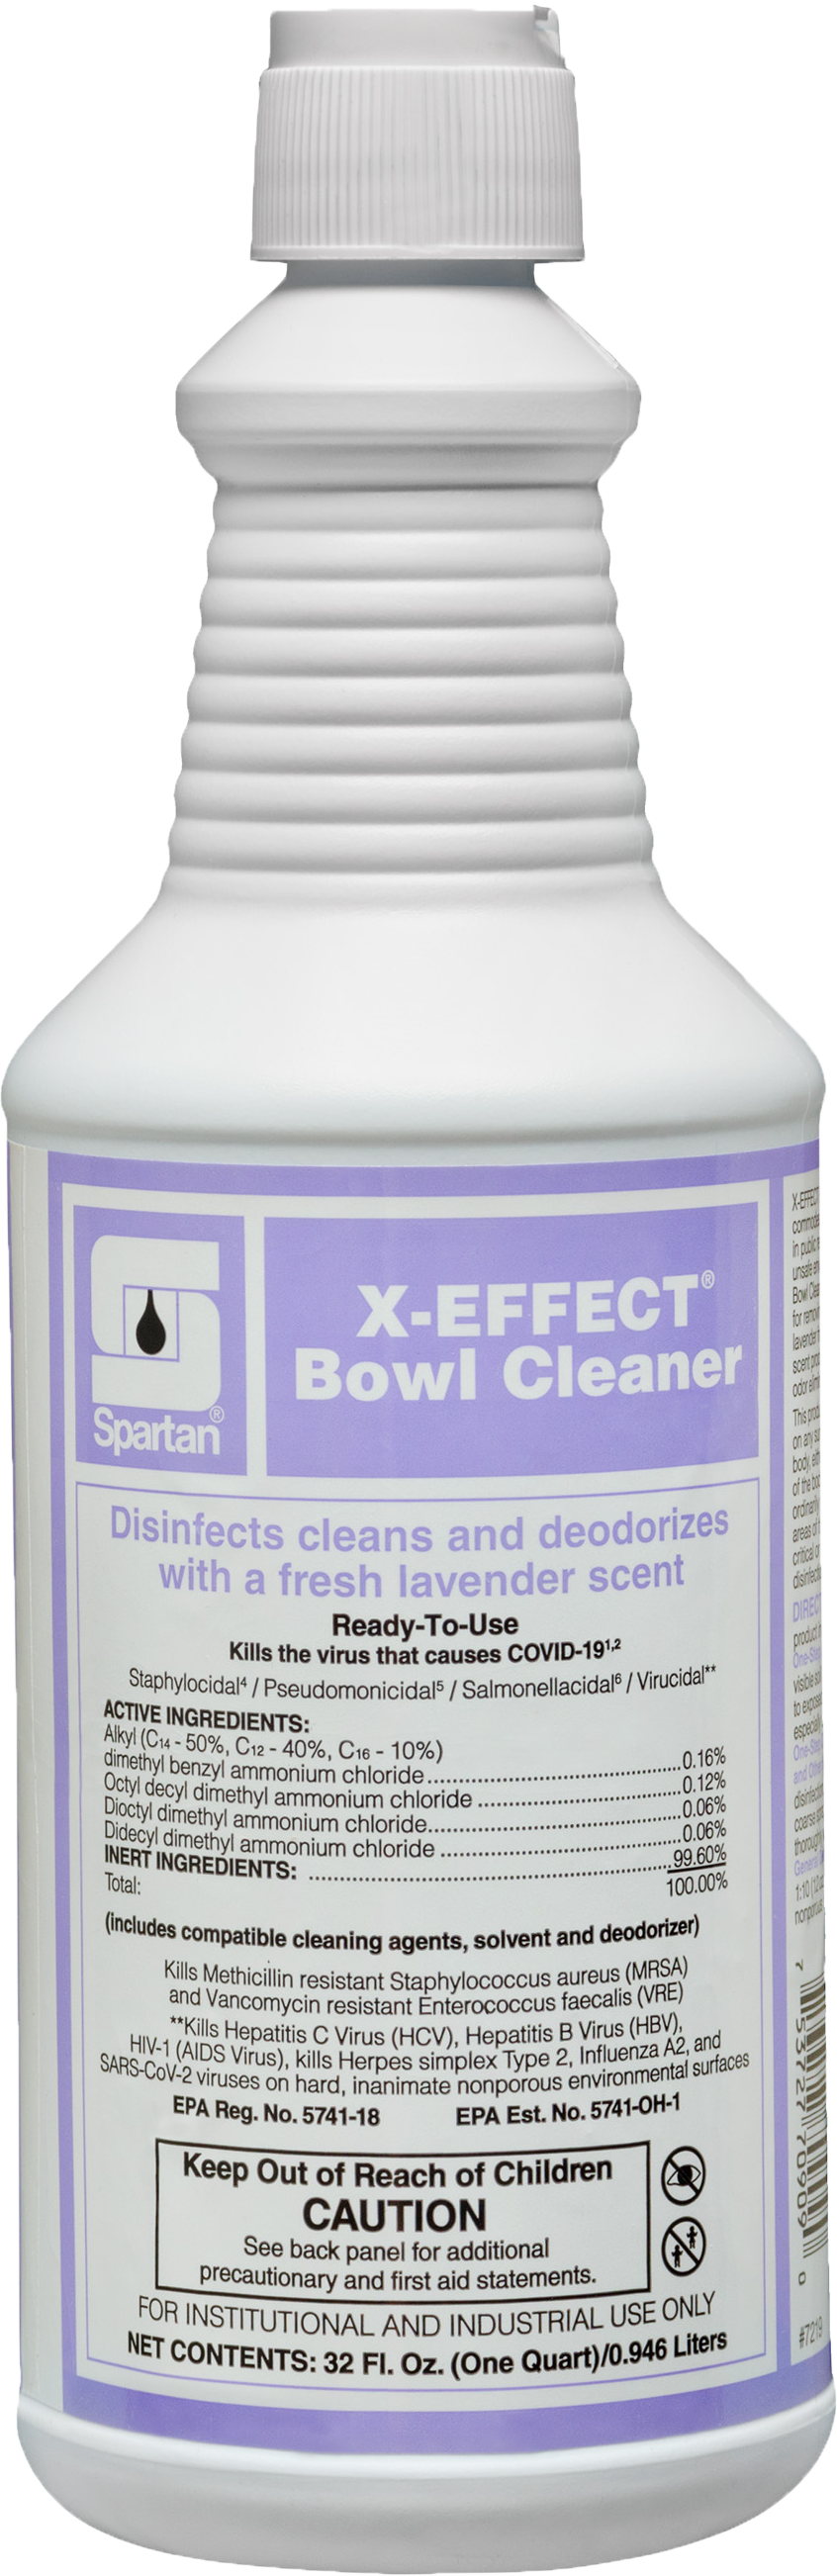 HDi X-Effect Bowl Cleaner Cleaner